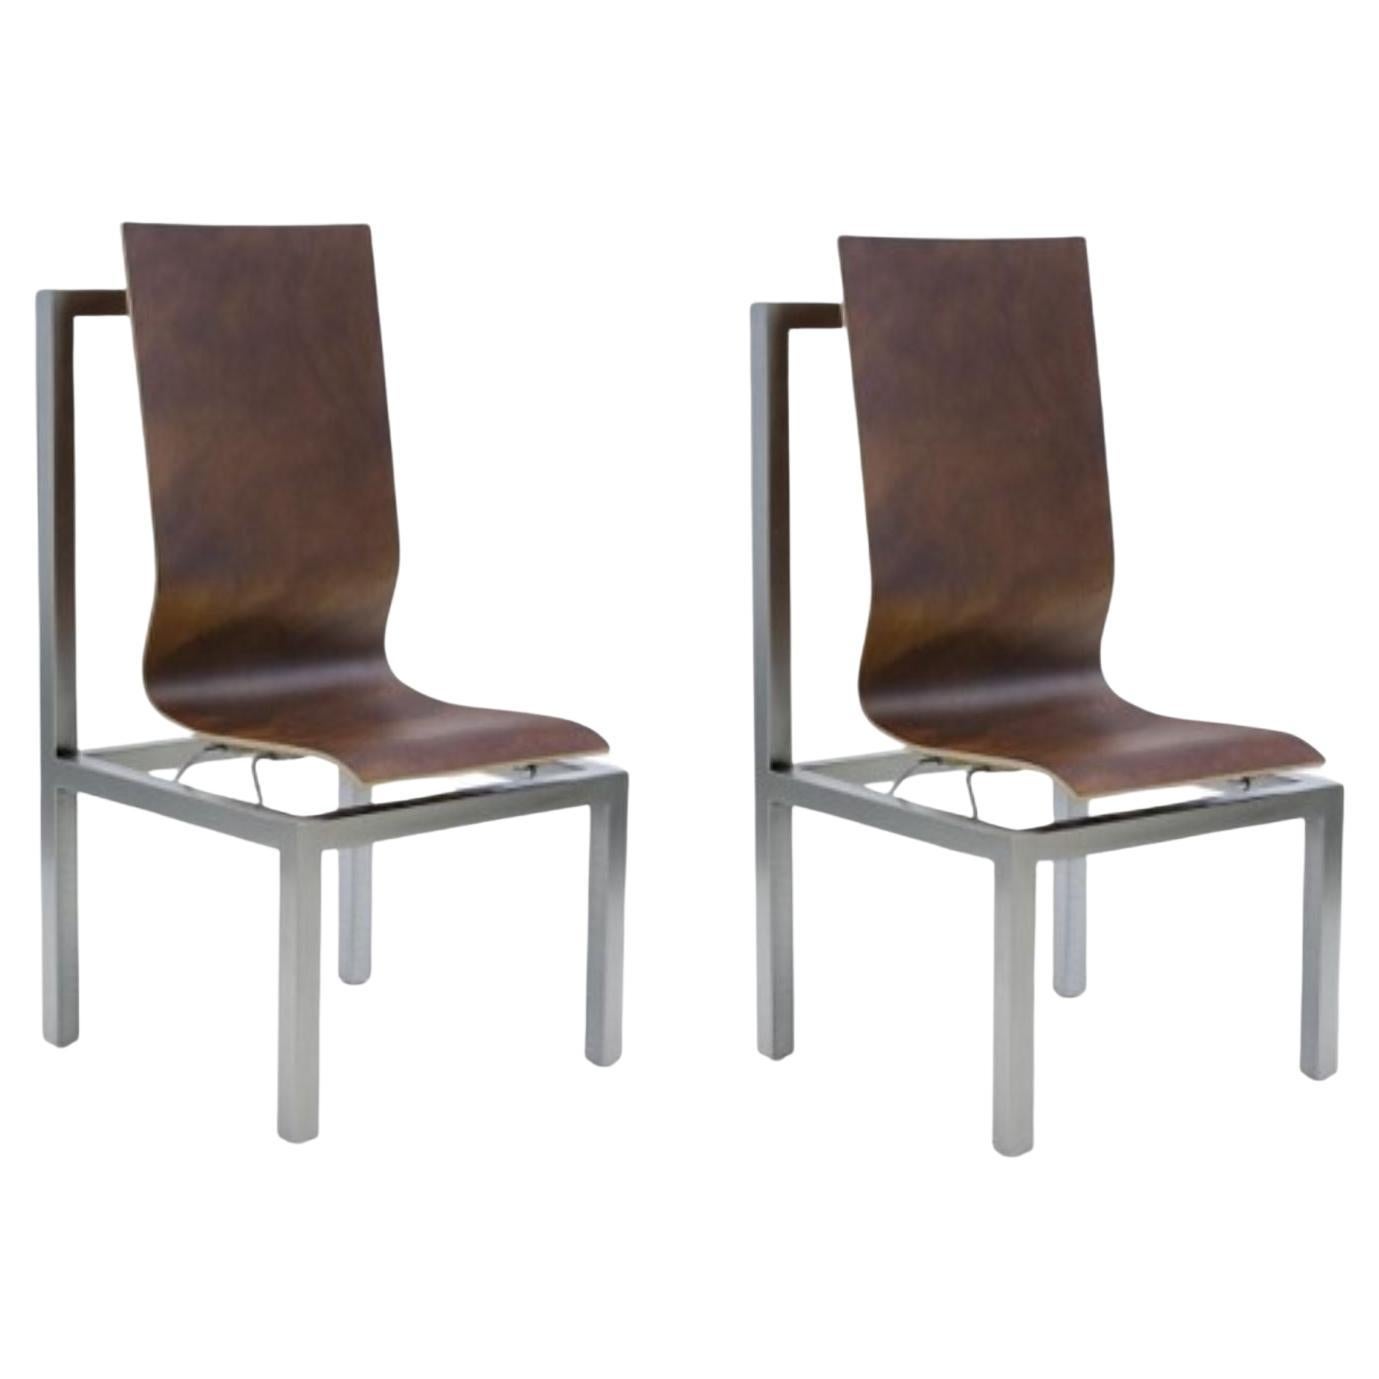 Set of 2 BNF Chaise Chairs by Dominique Perrault & Gaelle Lauriot Prevost For Sale